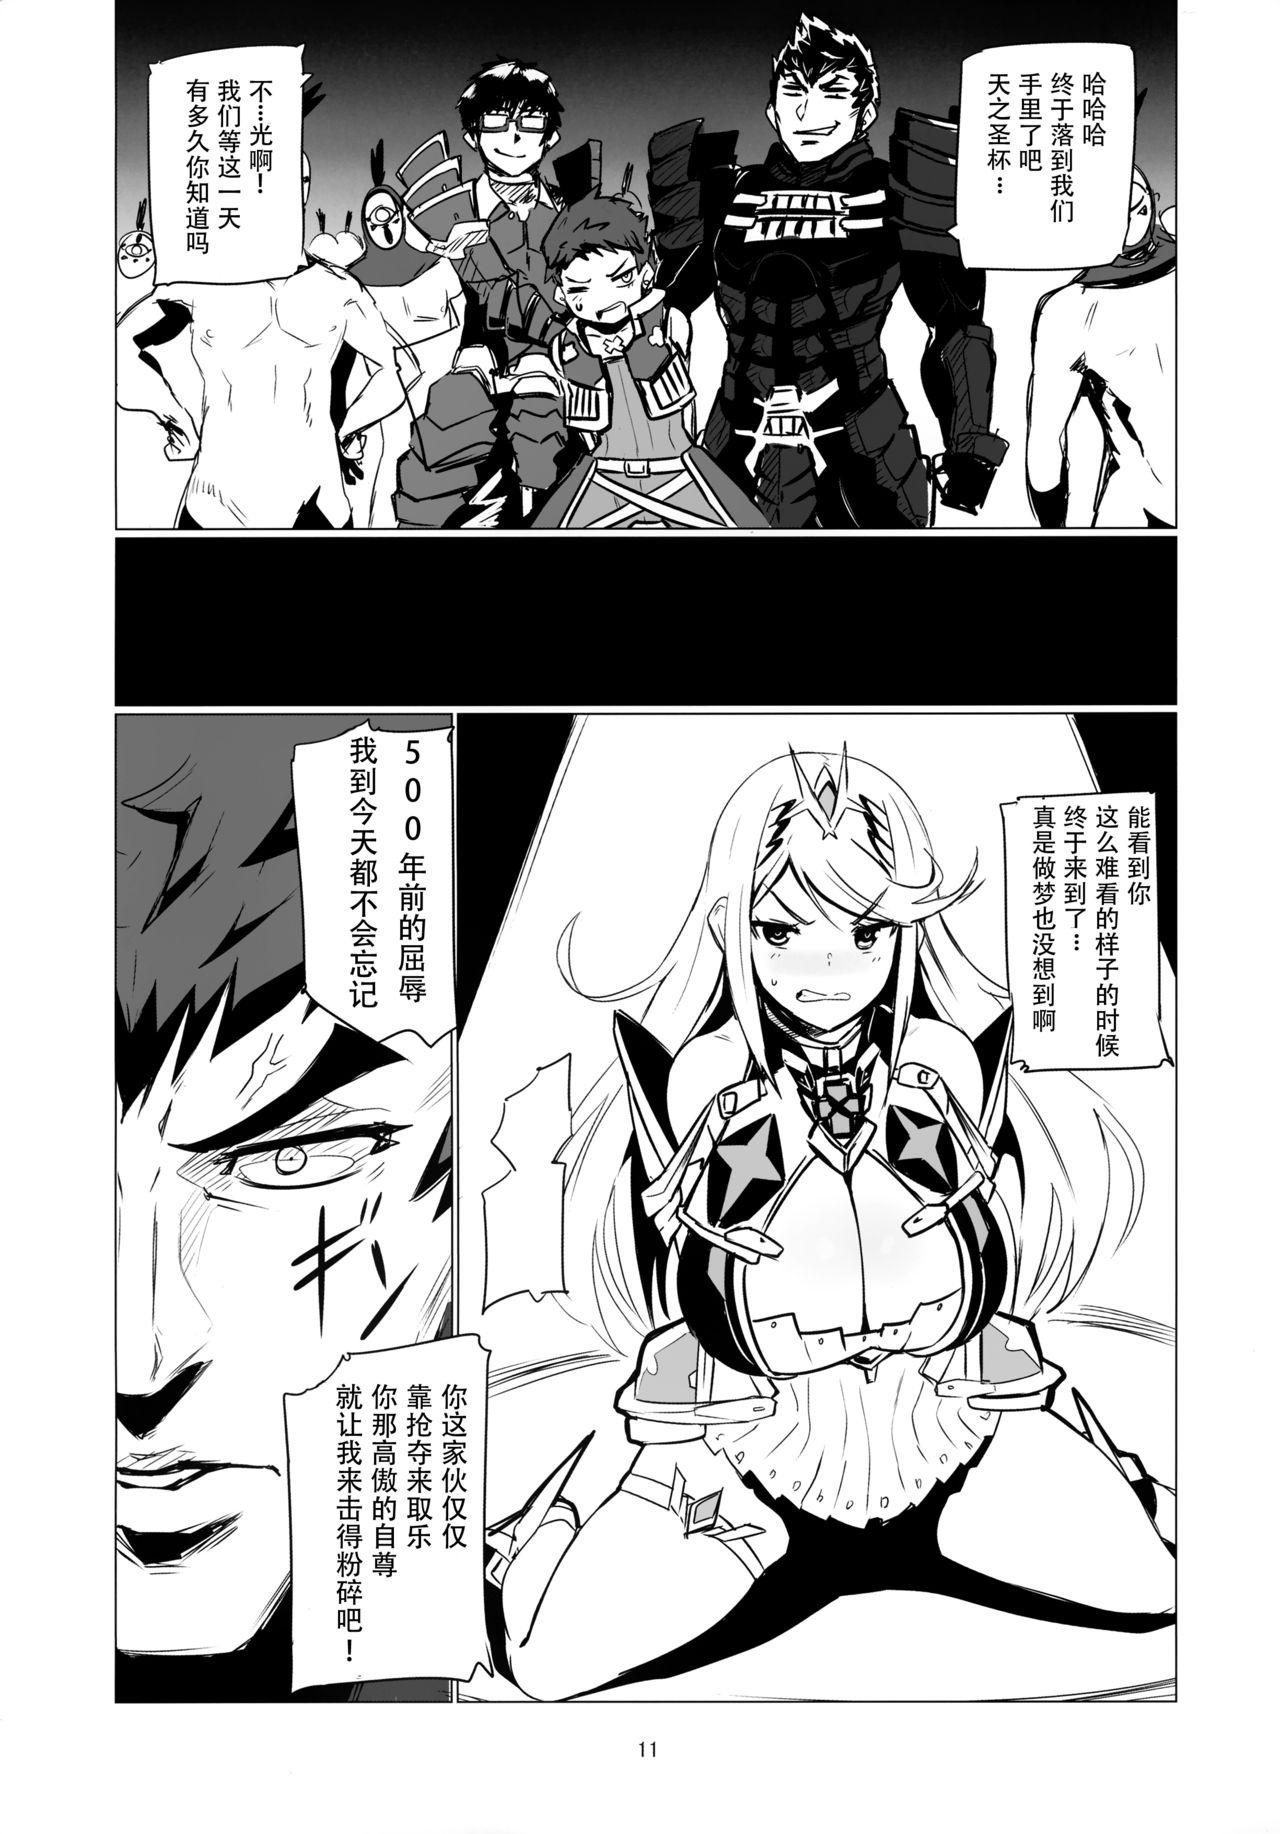 Fuck Her Hard Homurizebure - Xenoblade chronicles 2 Daring - Page 11